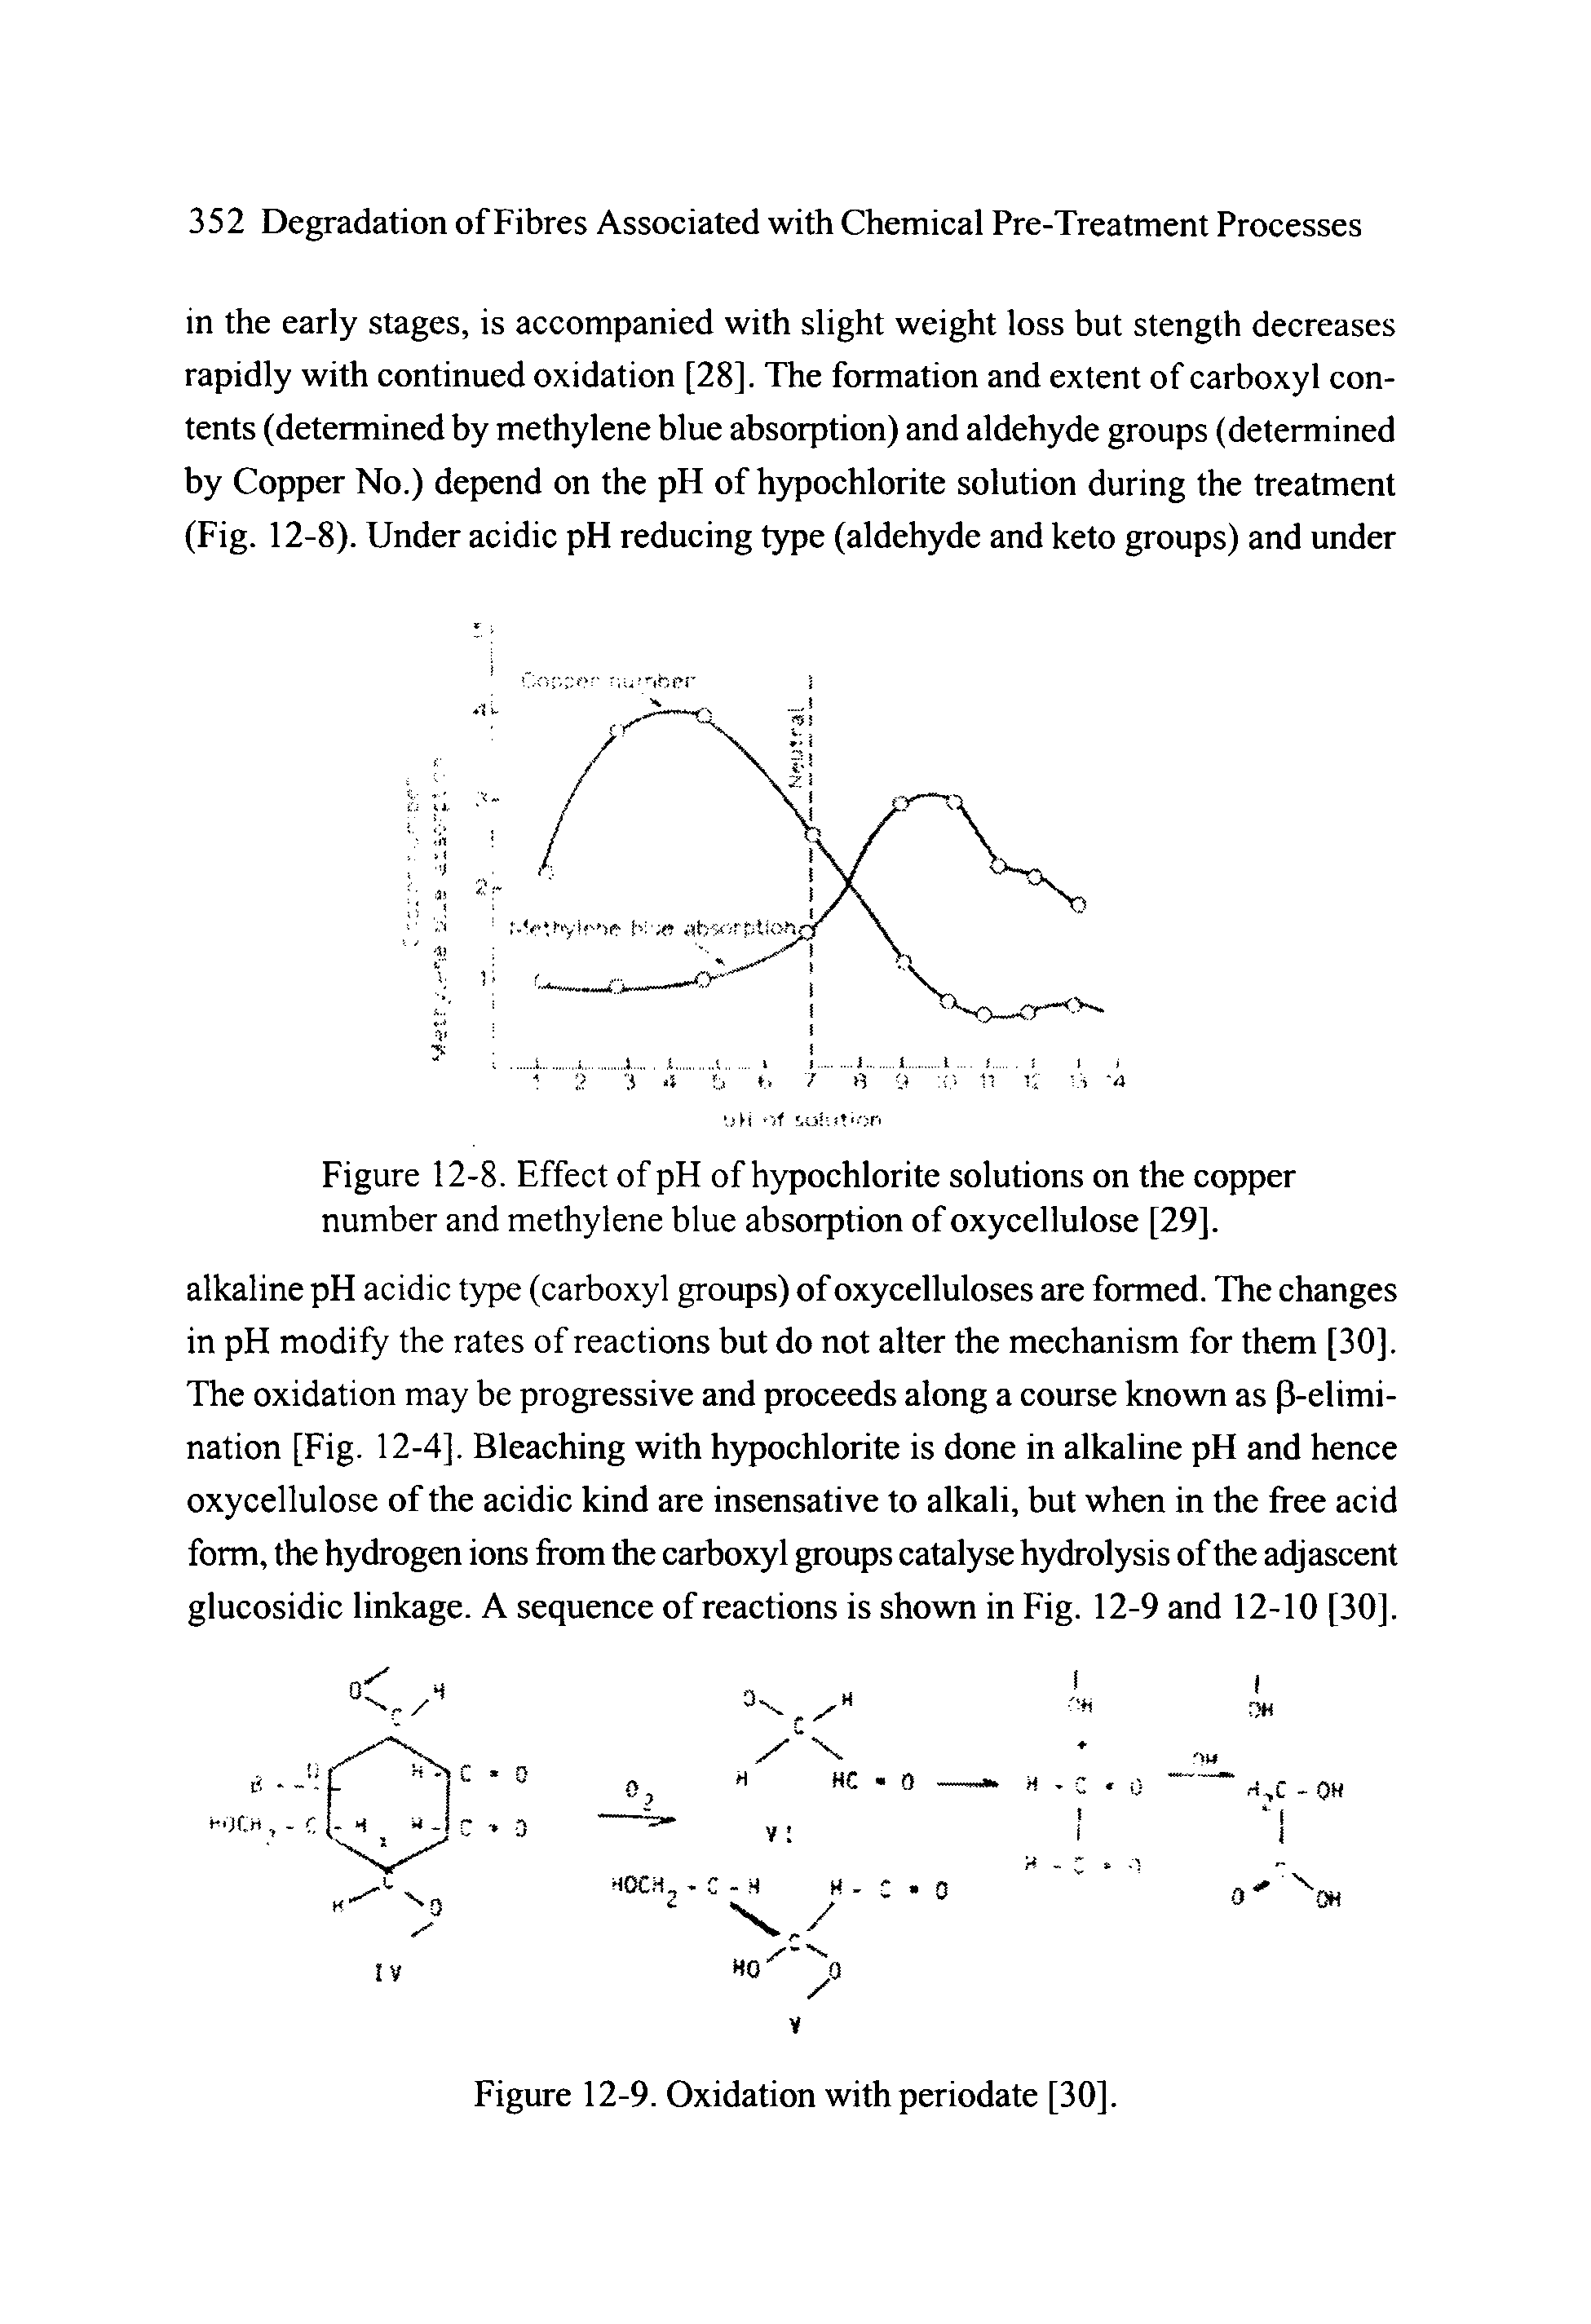 Figure 12-8. Effect of pH of hypochlorite solutions on the copper number and methylene blue absorption of oxycellulose [29].